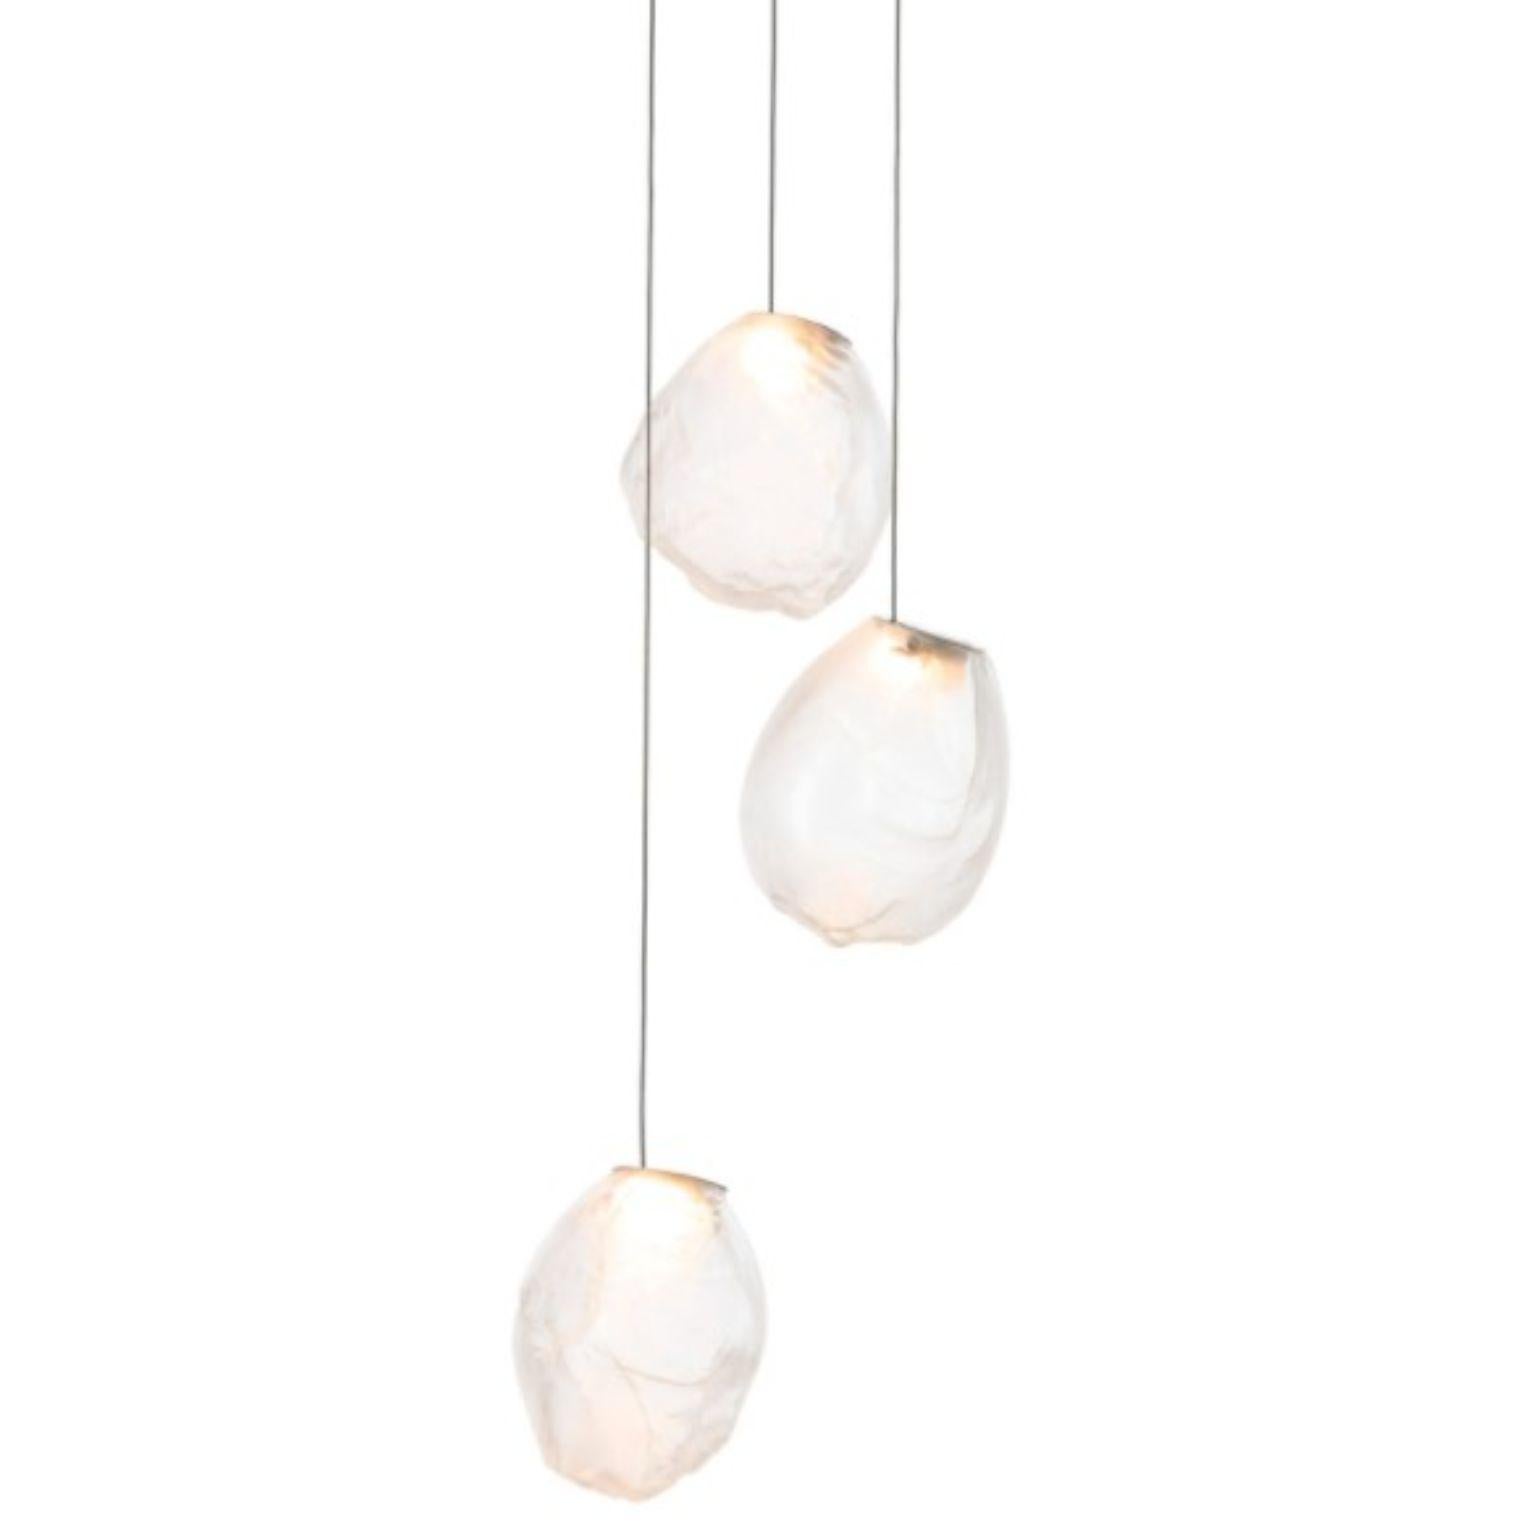 73.3 pendant by Bocci
Dimensions: D 15.2 x H 300 cm
Materials: brushed nickel round canopy
Weight: 8 kg
Also Available in different dimensions and colours.

All our lamps can be wired according to each country. If sold to the USA it will be